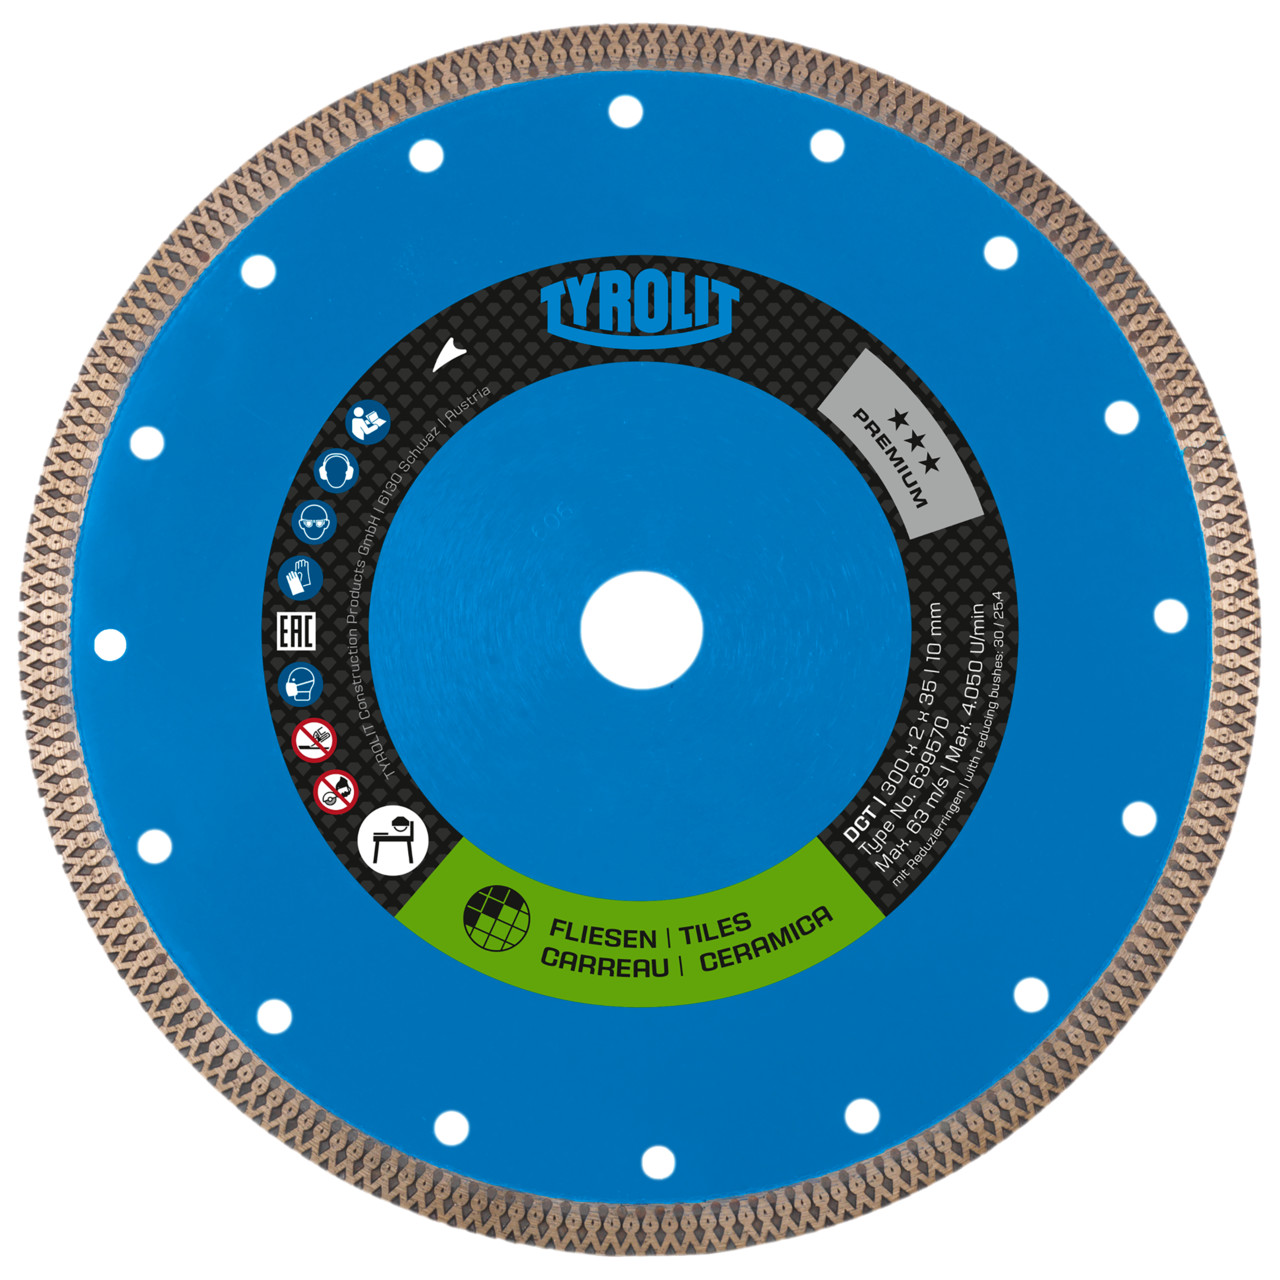 TYROLIT table saw blade DxTxH 250x1.6x35 DCT, shape: 1A1R (cut-off wheel with continuous cutting wheel), Art. 639569